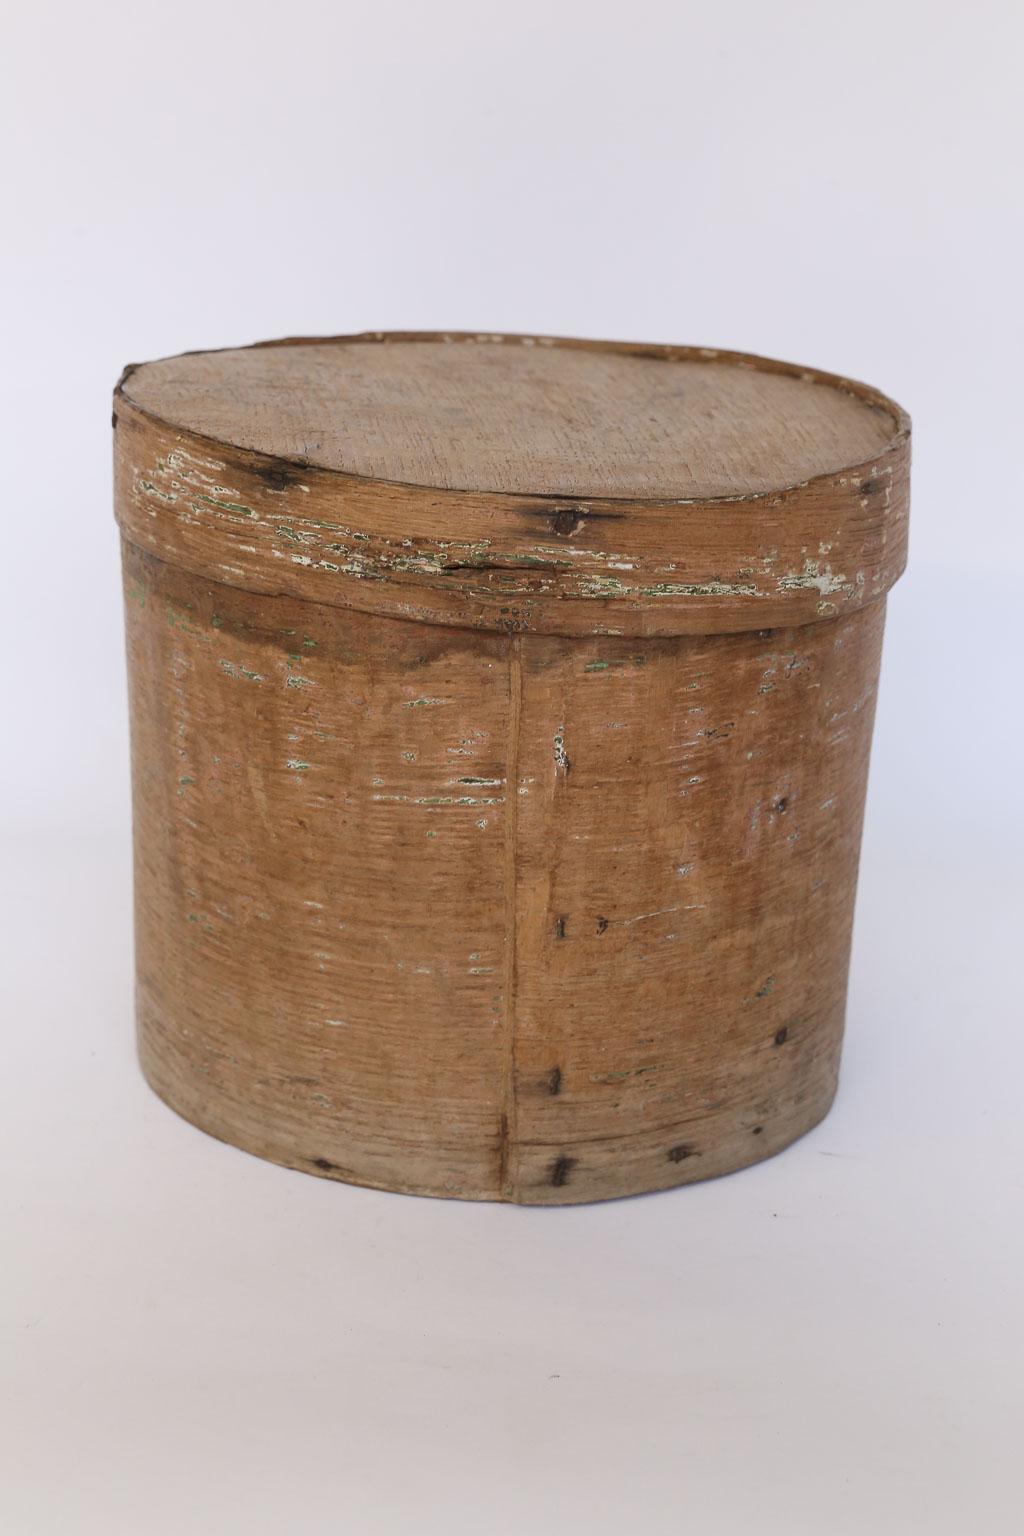 This is a wonderful 19th century French pantry box. The lovely shape and patina of the wood make this a truly exceptional piece.